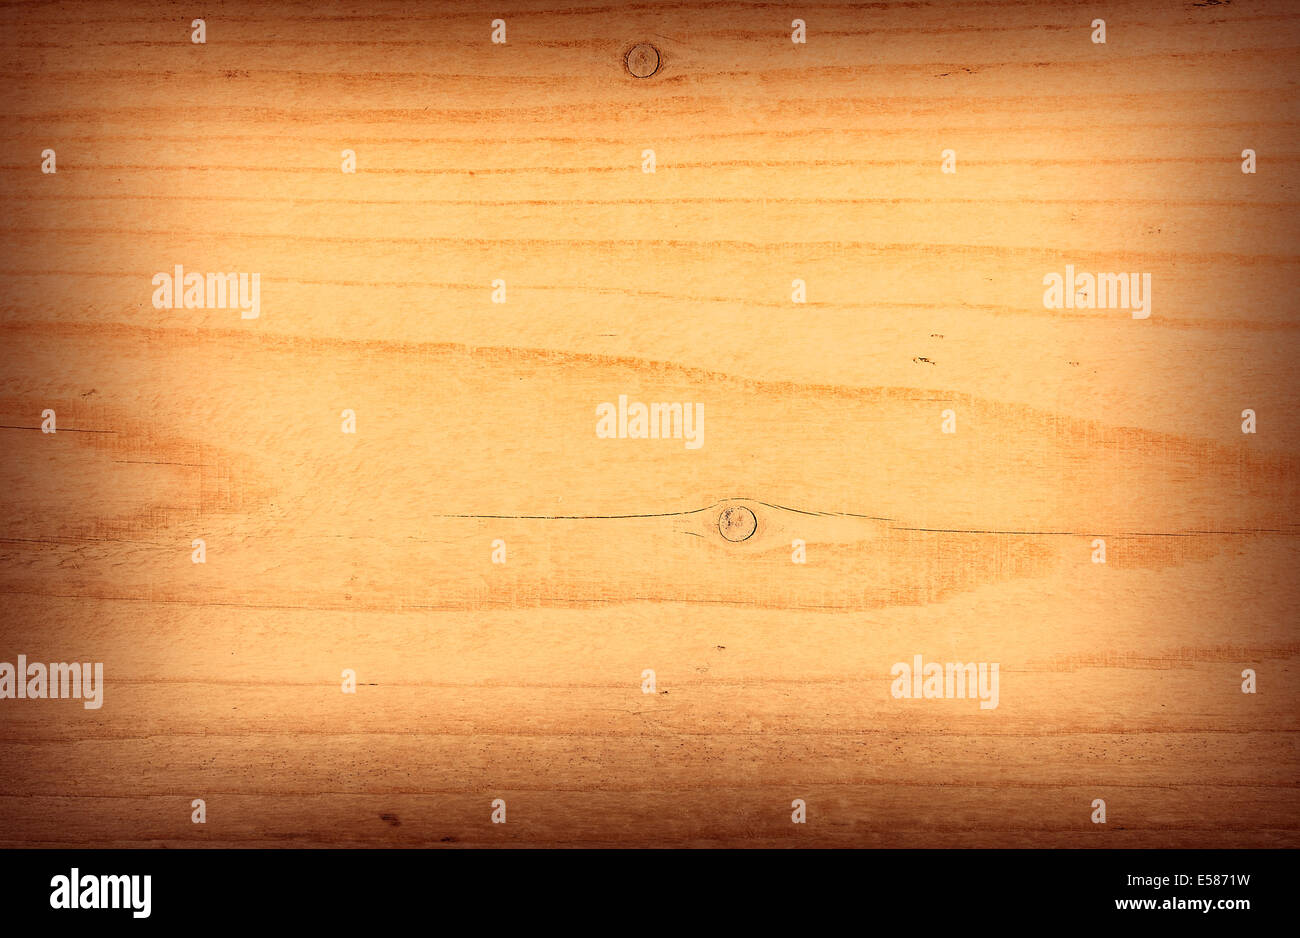 Wood texture in warm colors with vignette on edges Stock Photo